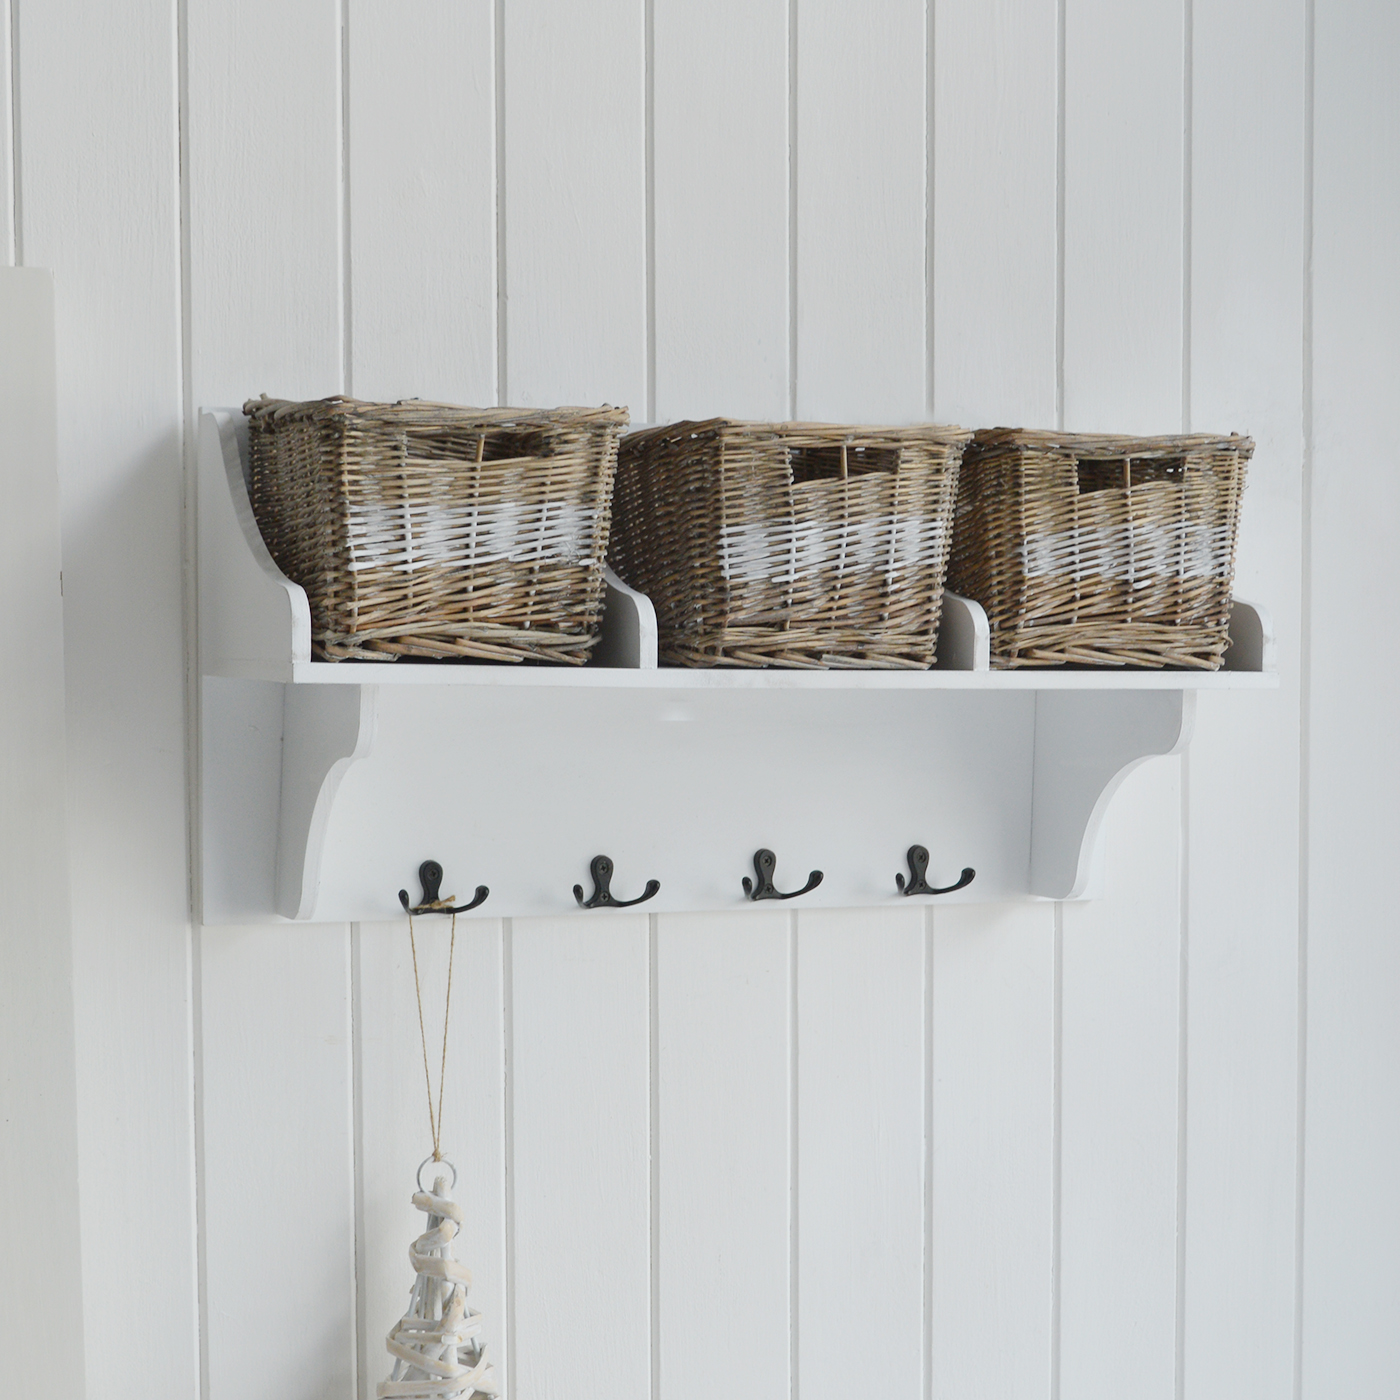 Chesterville White Wall Shelf with Baskets - New England White Furniture for coastal, country and modern farmhouse styled homes and interiors